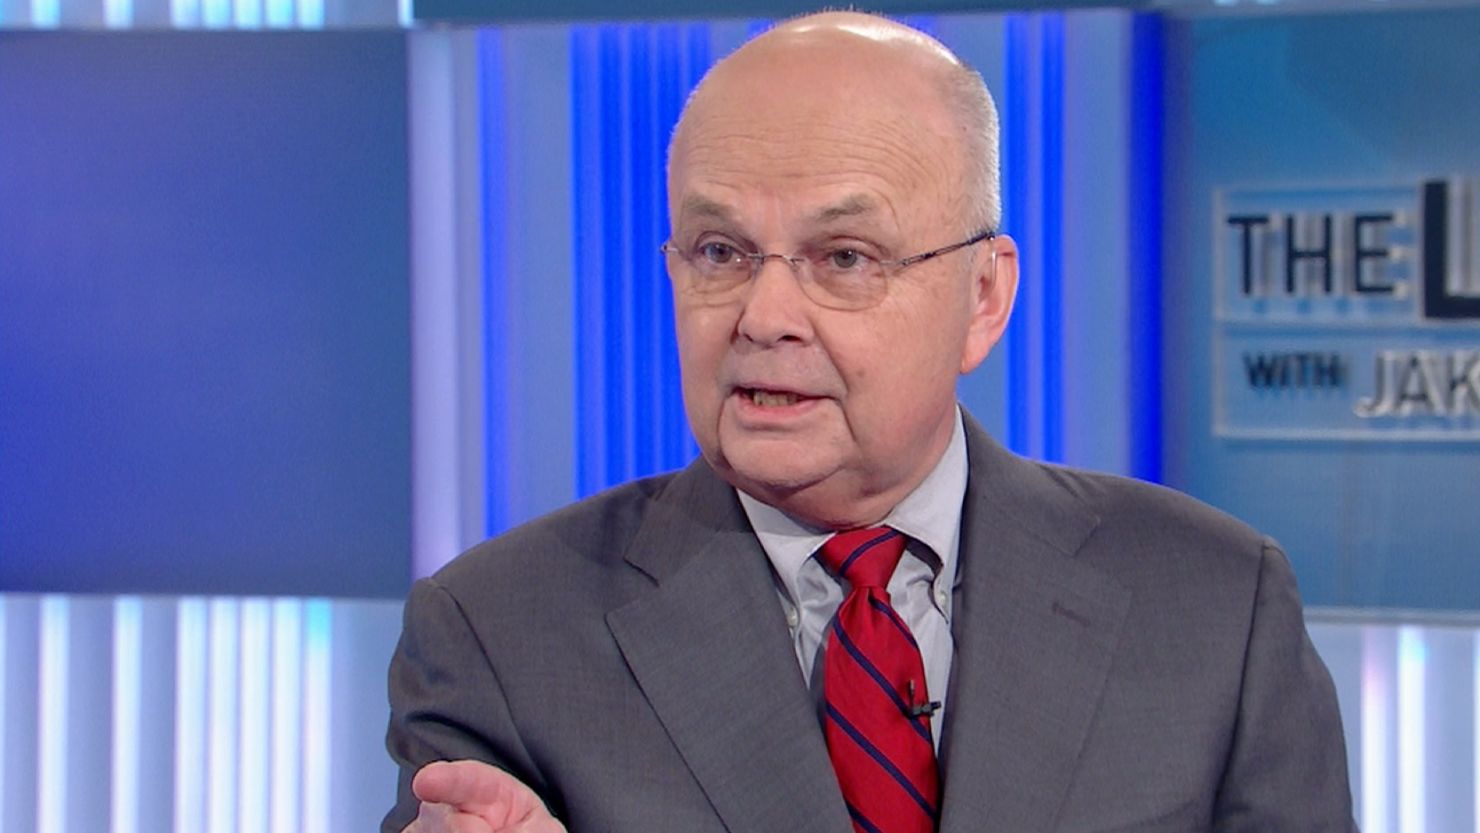 Michael Hayden says Congress could add an authorization for use of military force.